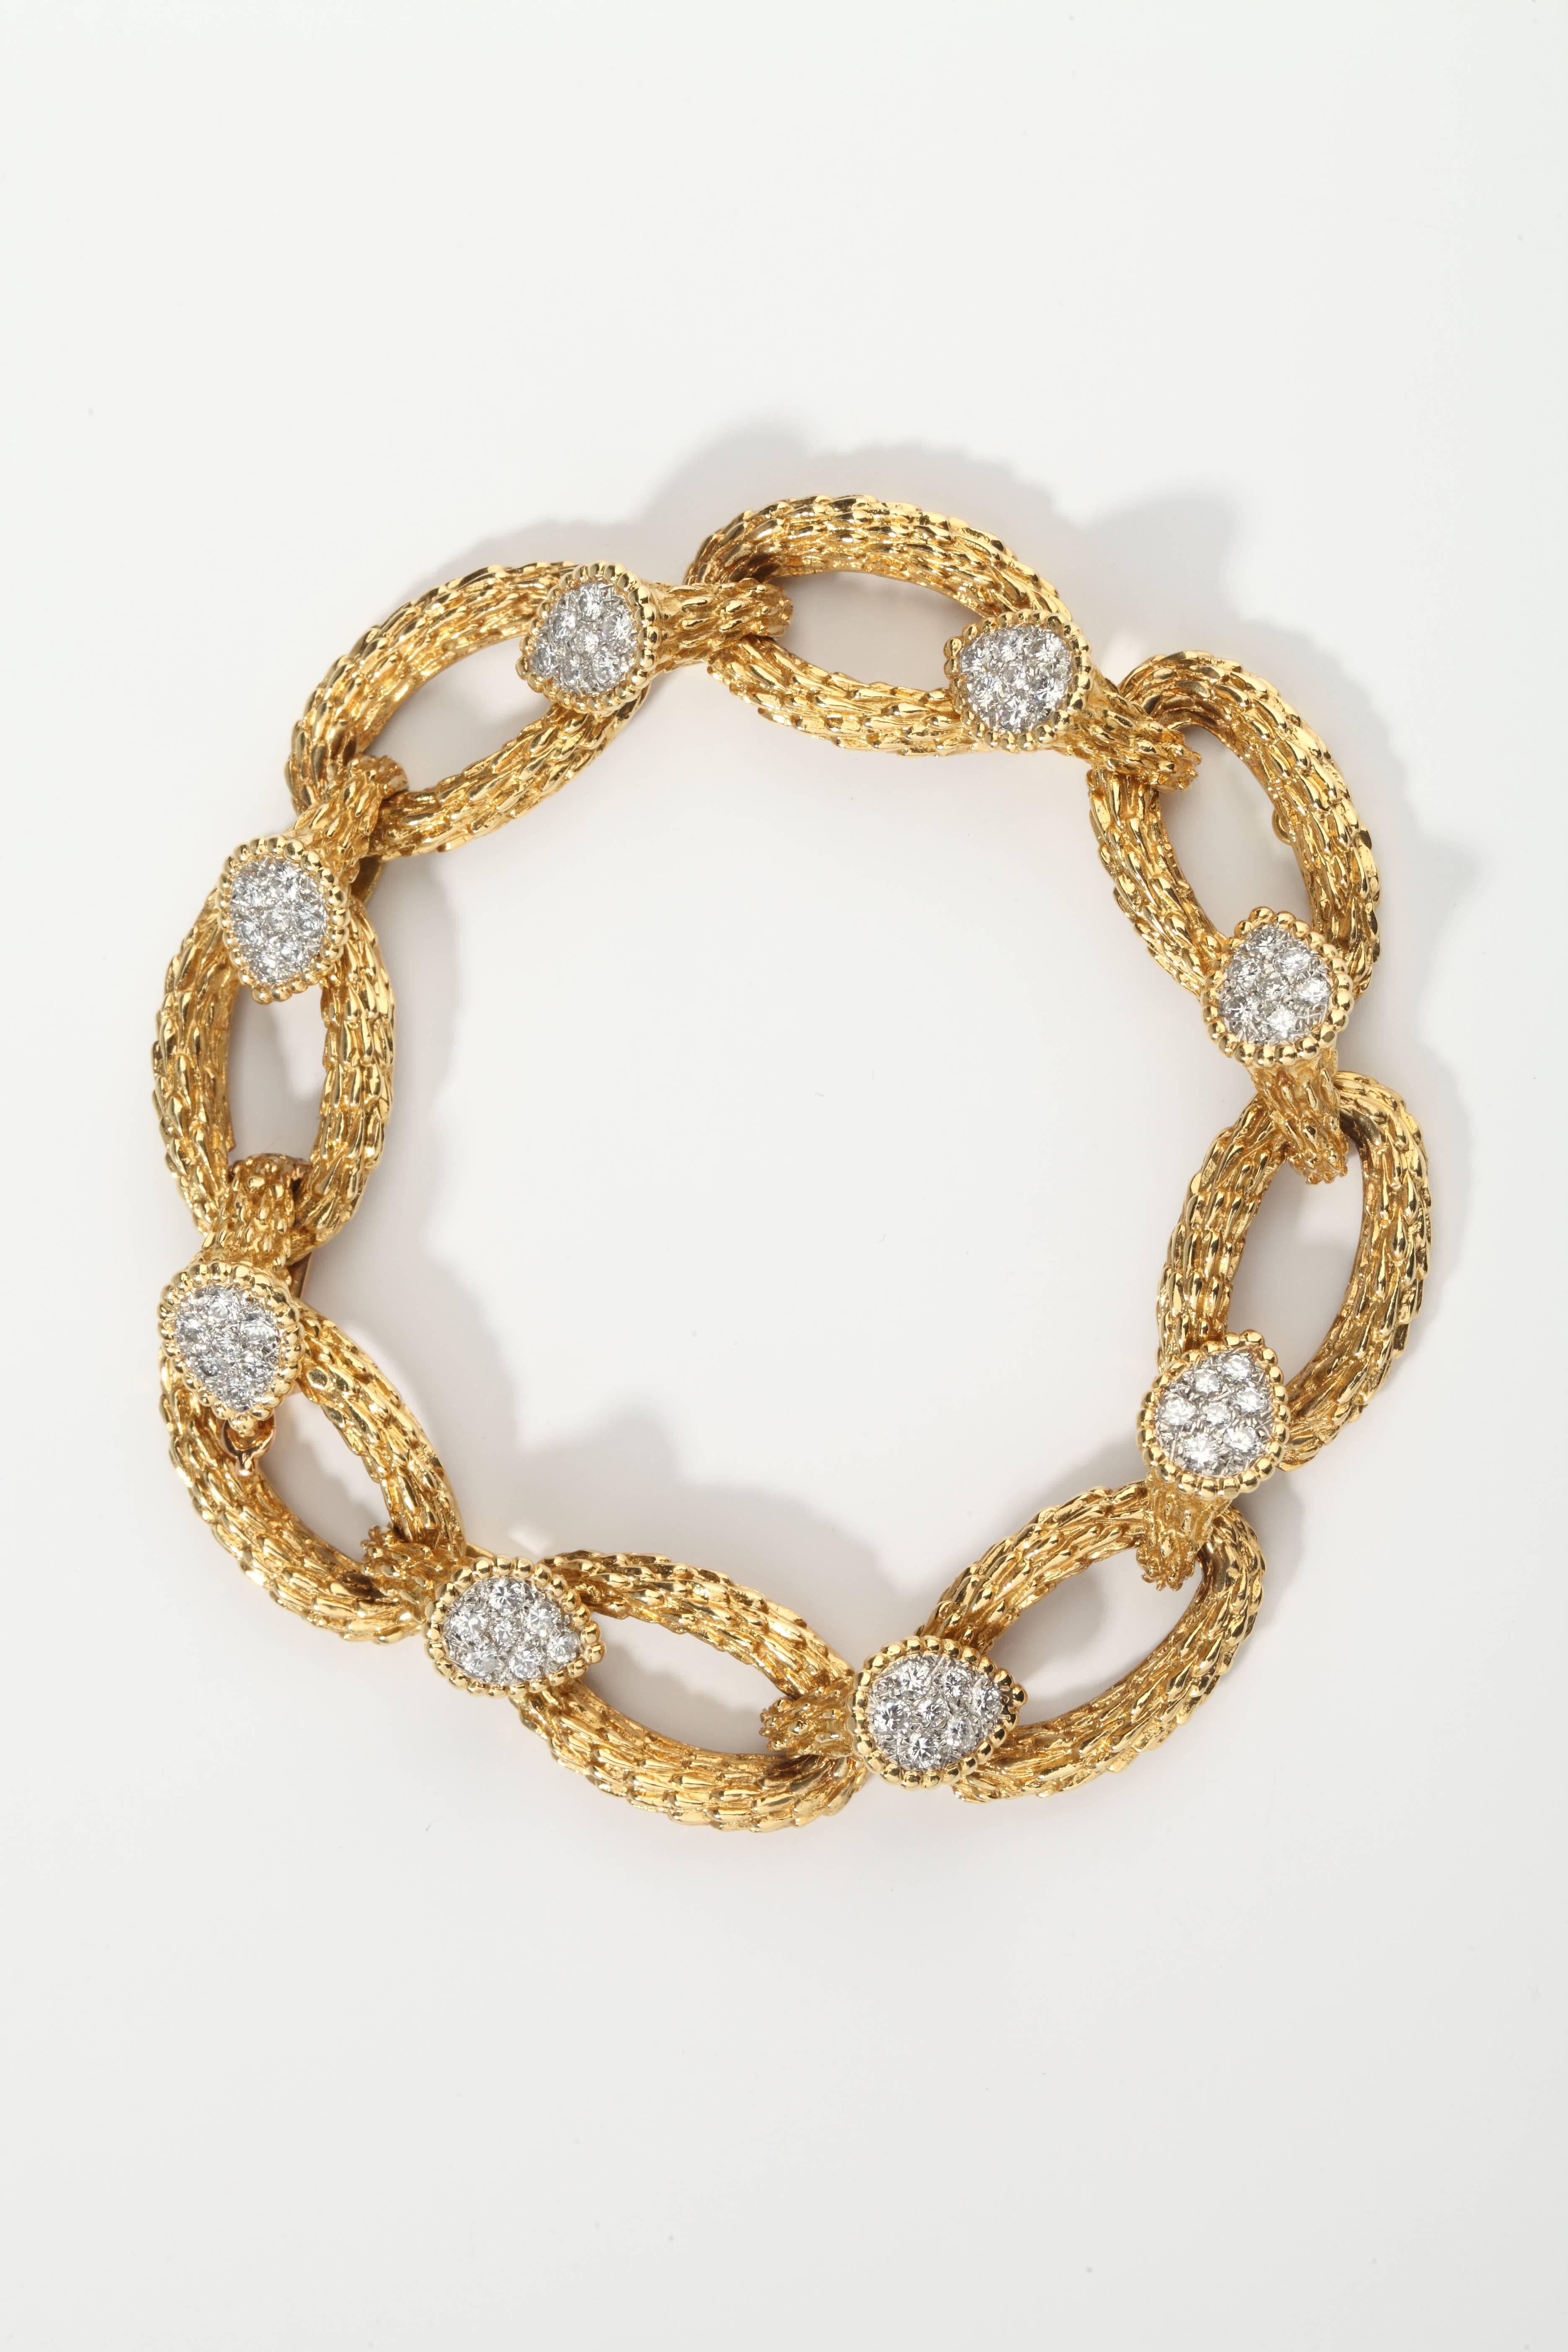 Yellow gold (18k) bracelet with 8 pave set diamonds (G-VS).
This iconic bracelet was first sold  in 1968 by BOUCHERON in reference of the snake necklace created in 1888 by Frederic Boucheron for his wife Gabrielle.
This exemplaire dates from the